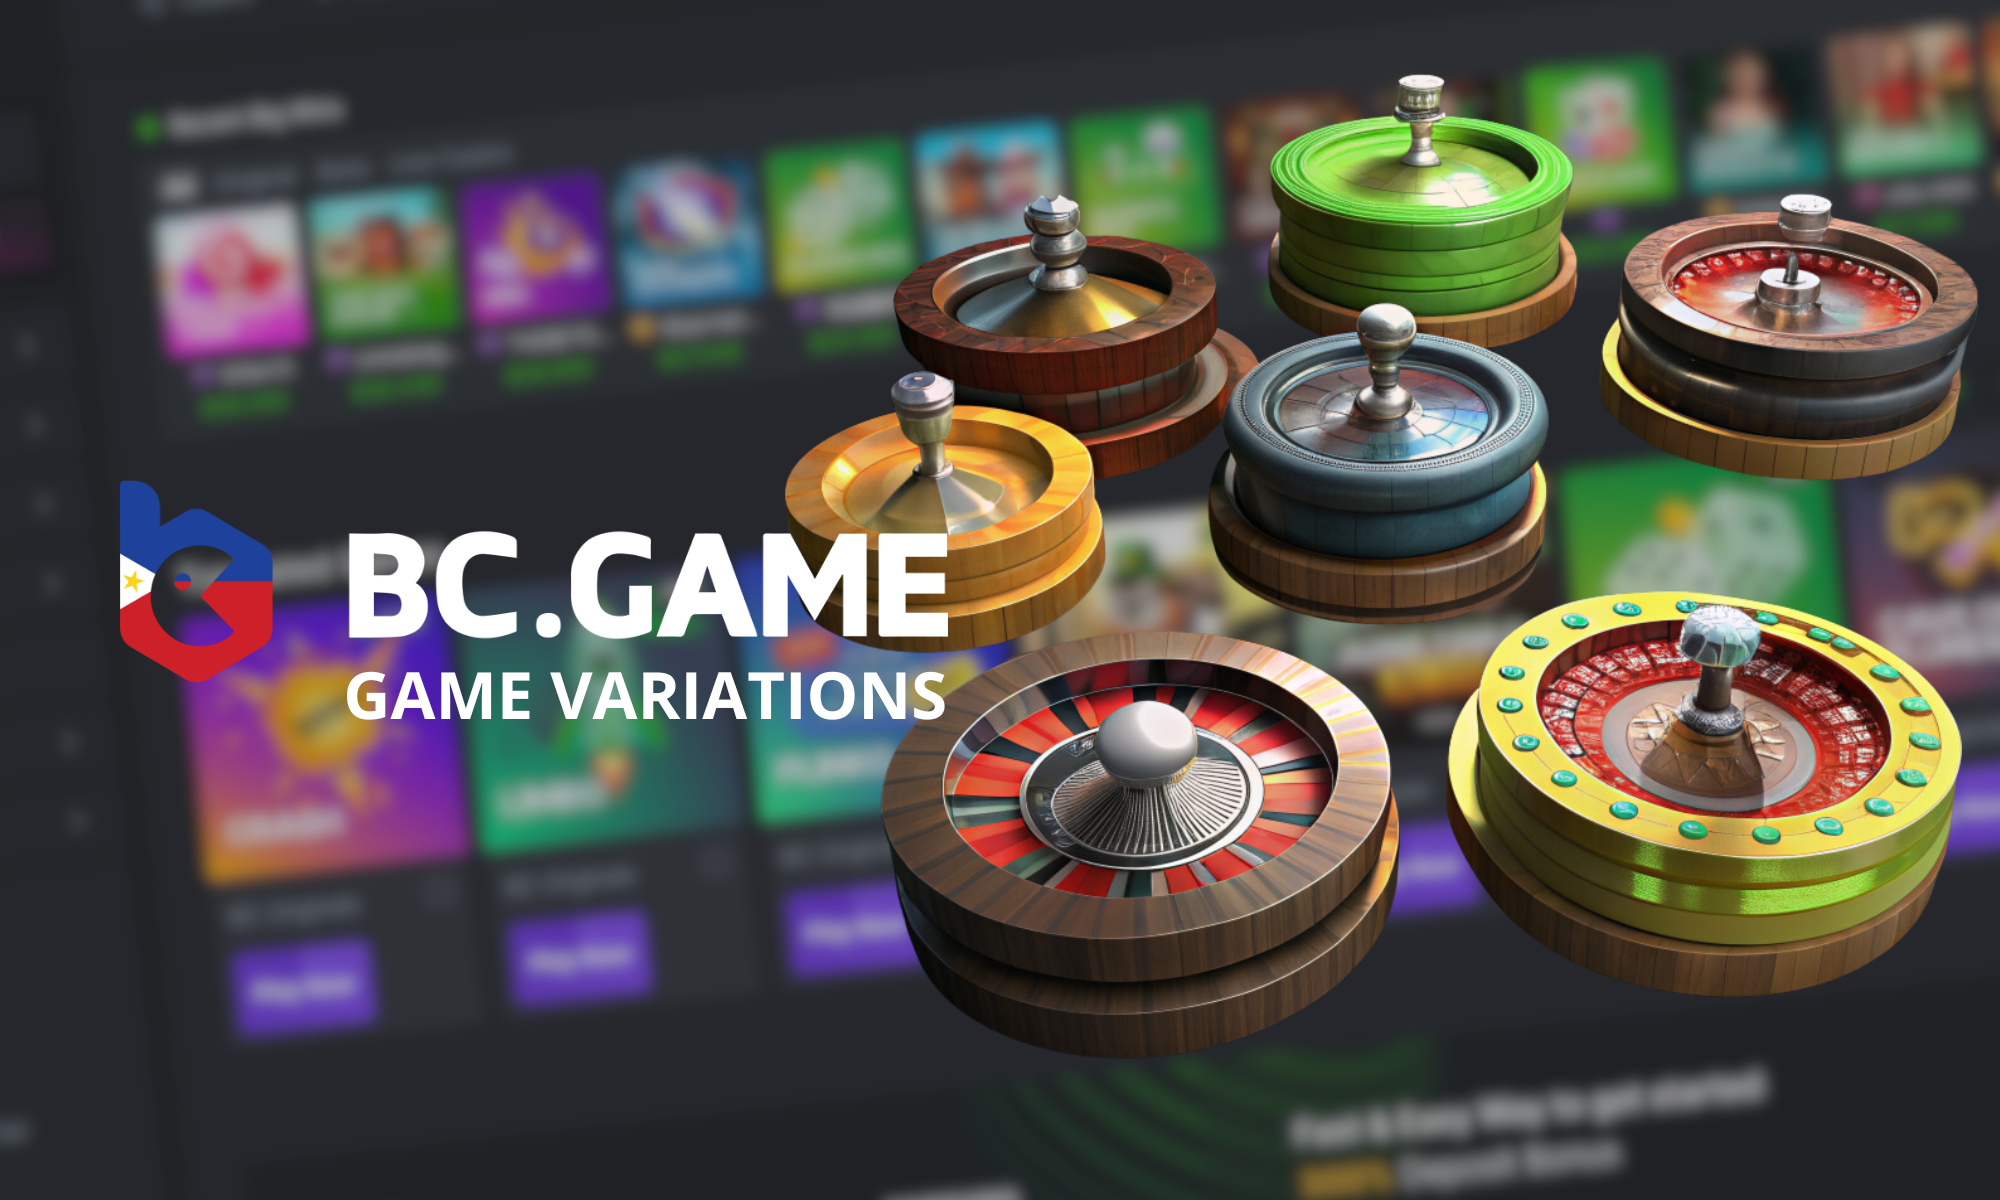 Roulette at BC Game is presented in numerous variations, which allows players to choose the type that suits their preferences